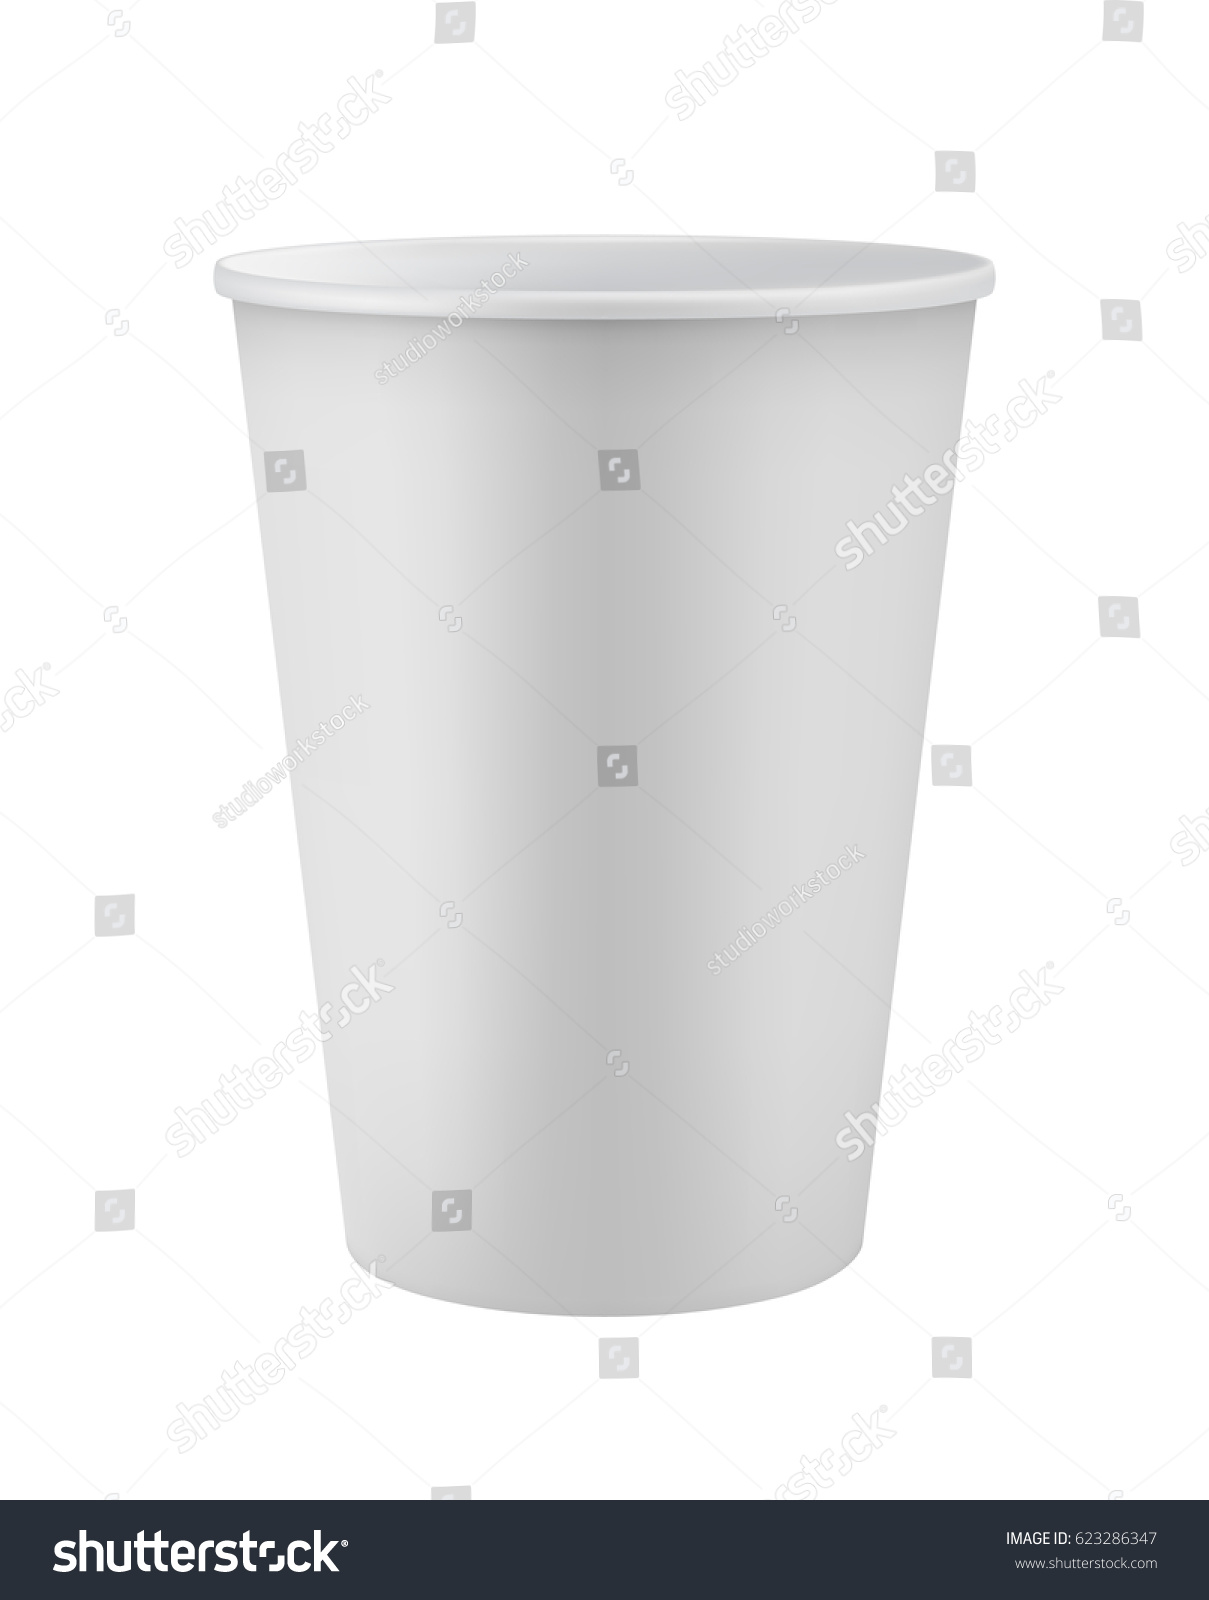 SVG of Blank white disposable coffee cup isolated on white background vector illustration. Packaging design element for branding. svg